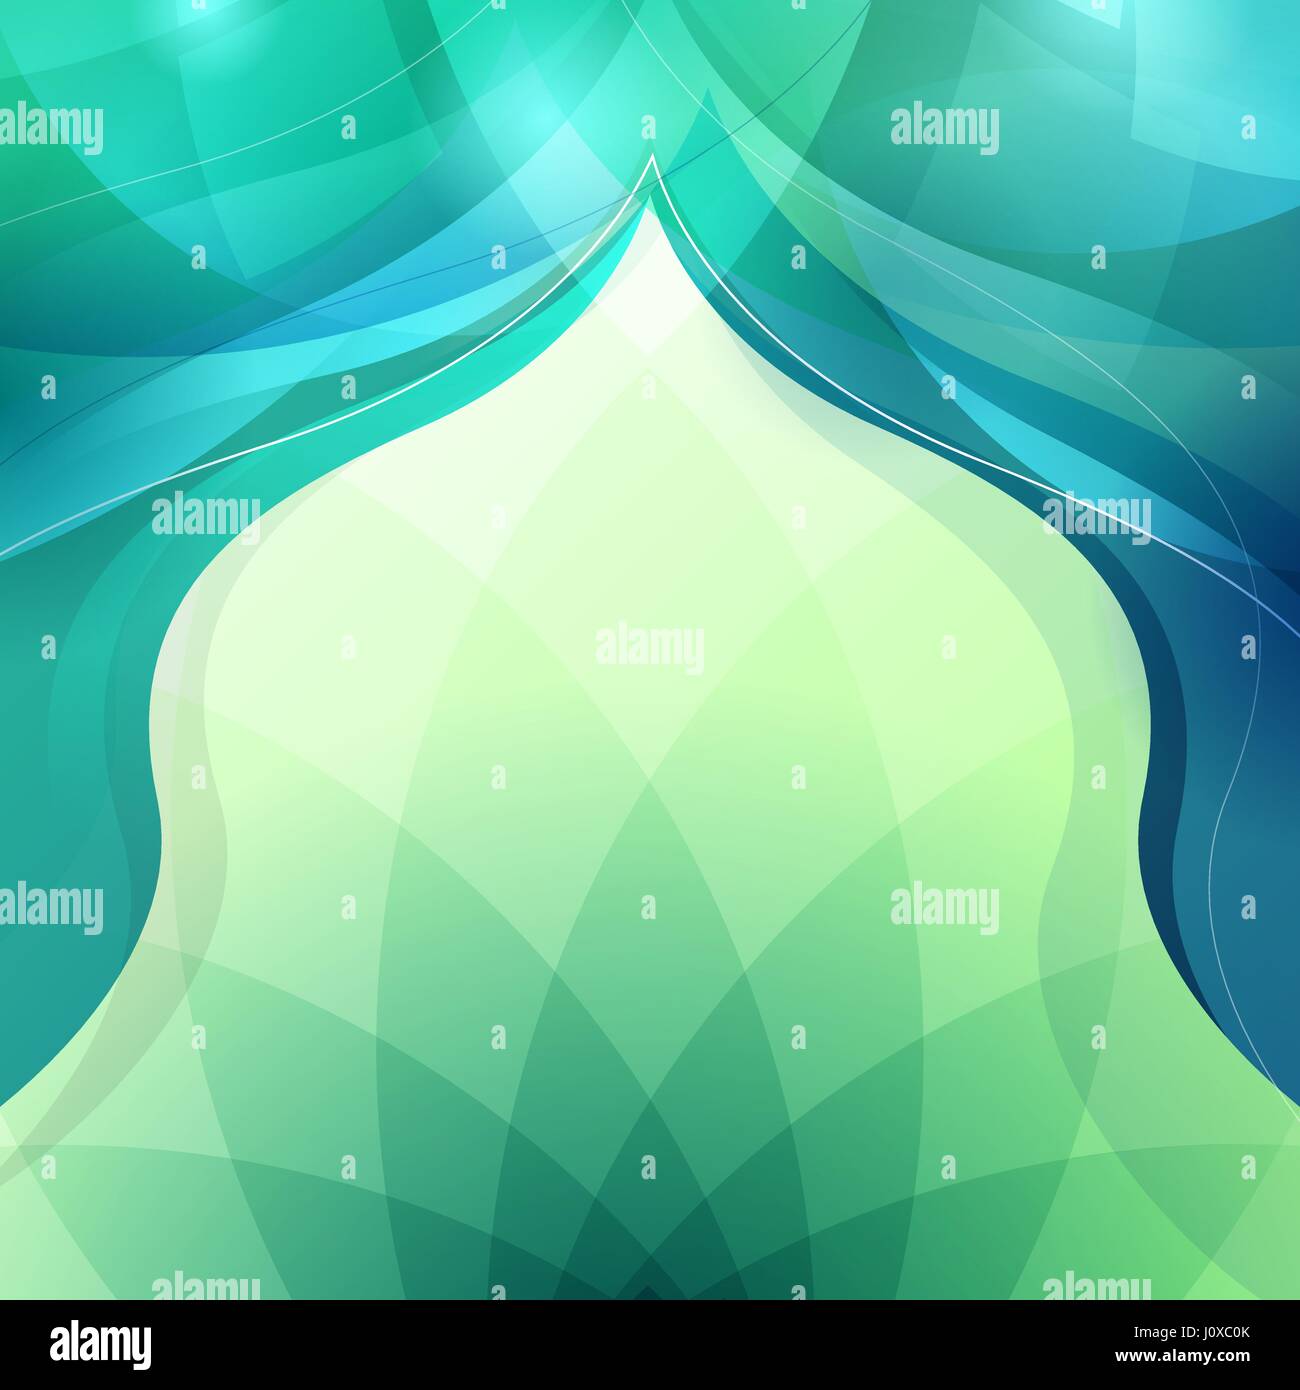 abstract background for Islamic Greeting design Stock Vector